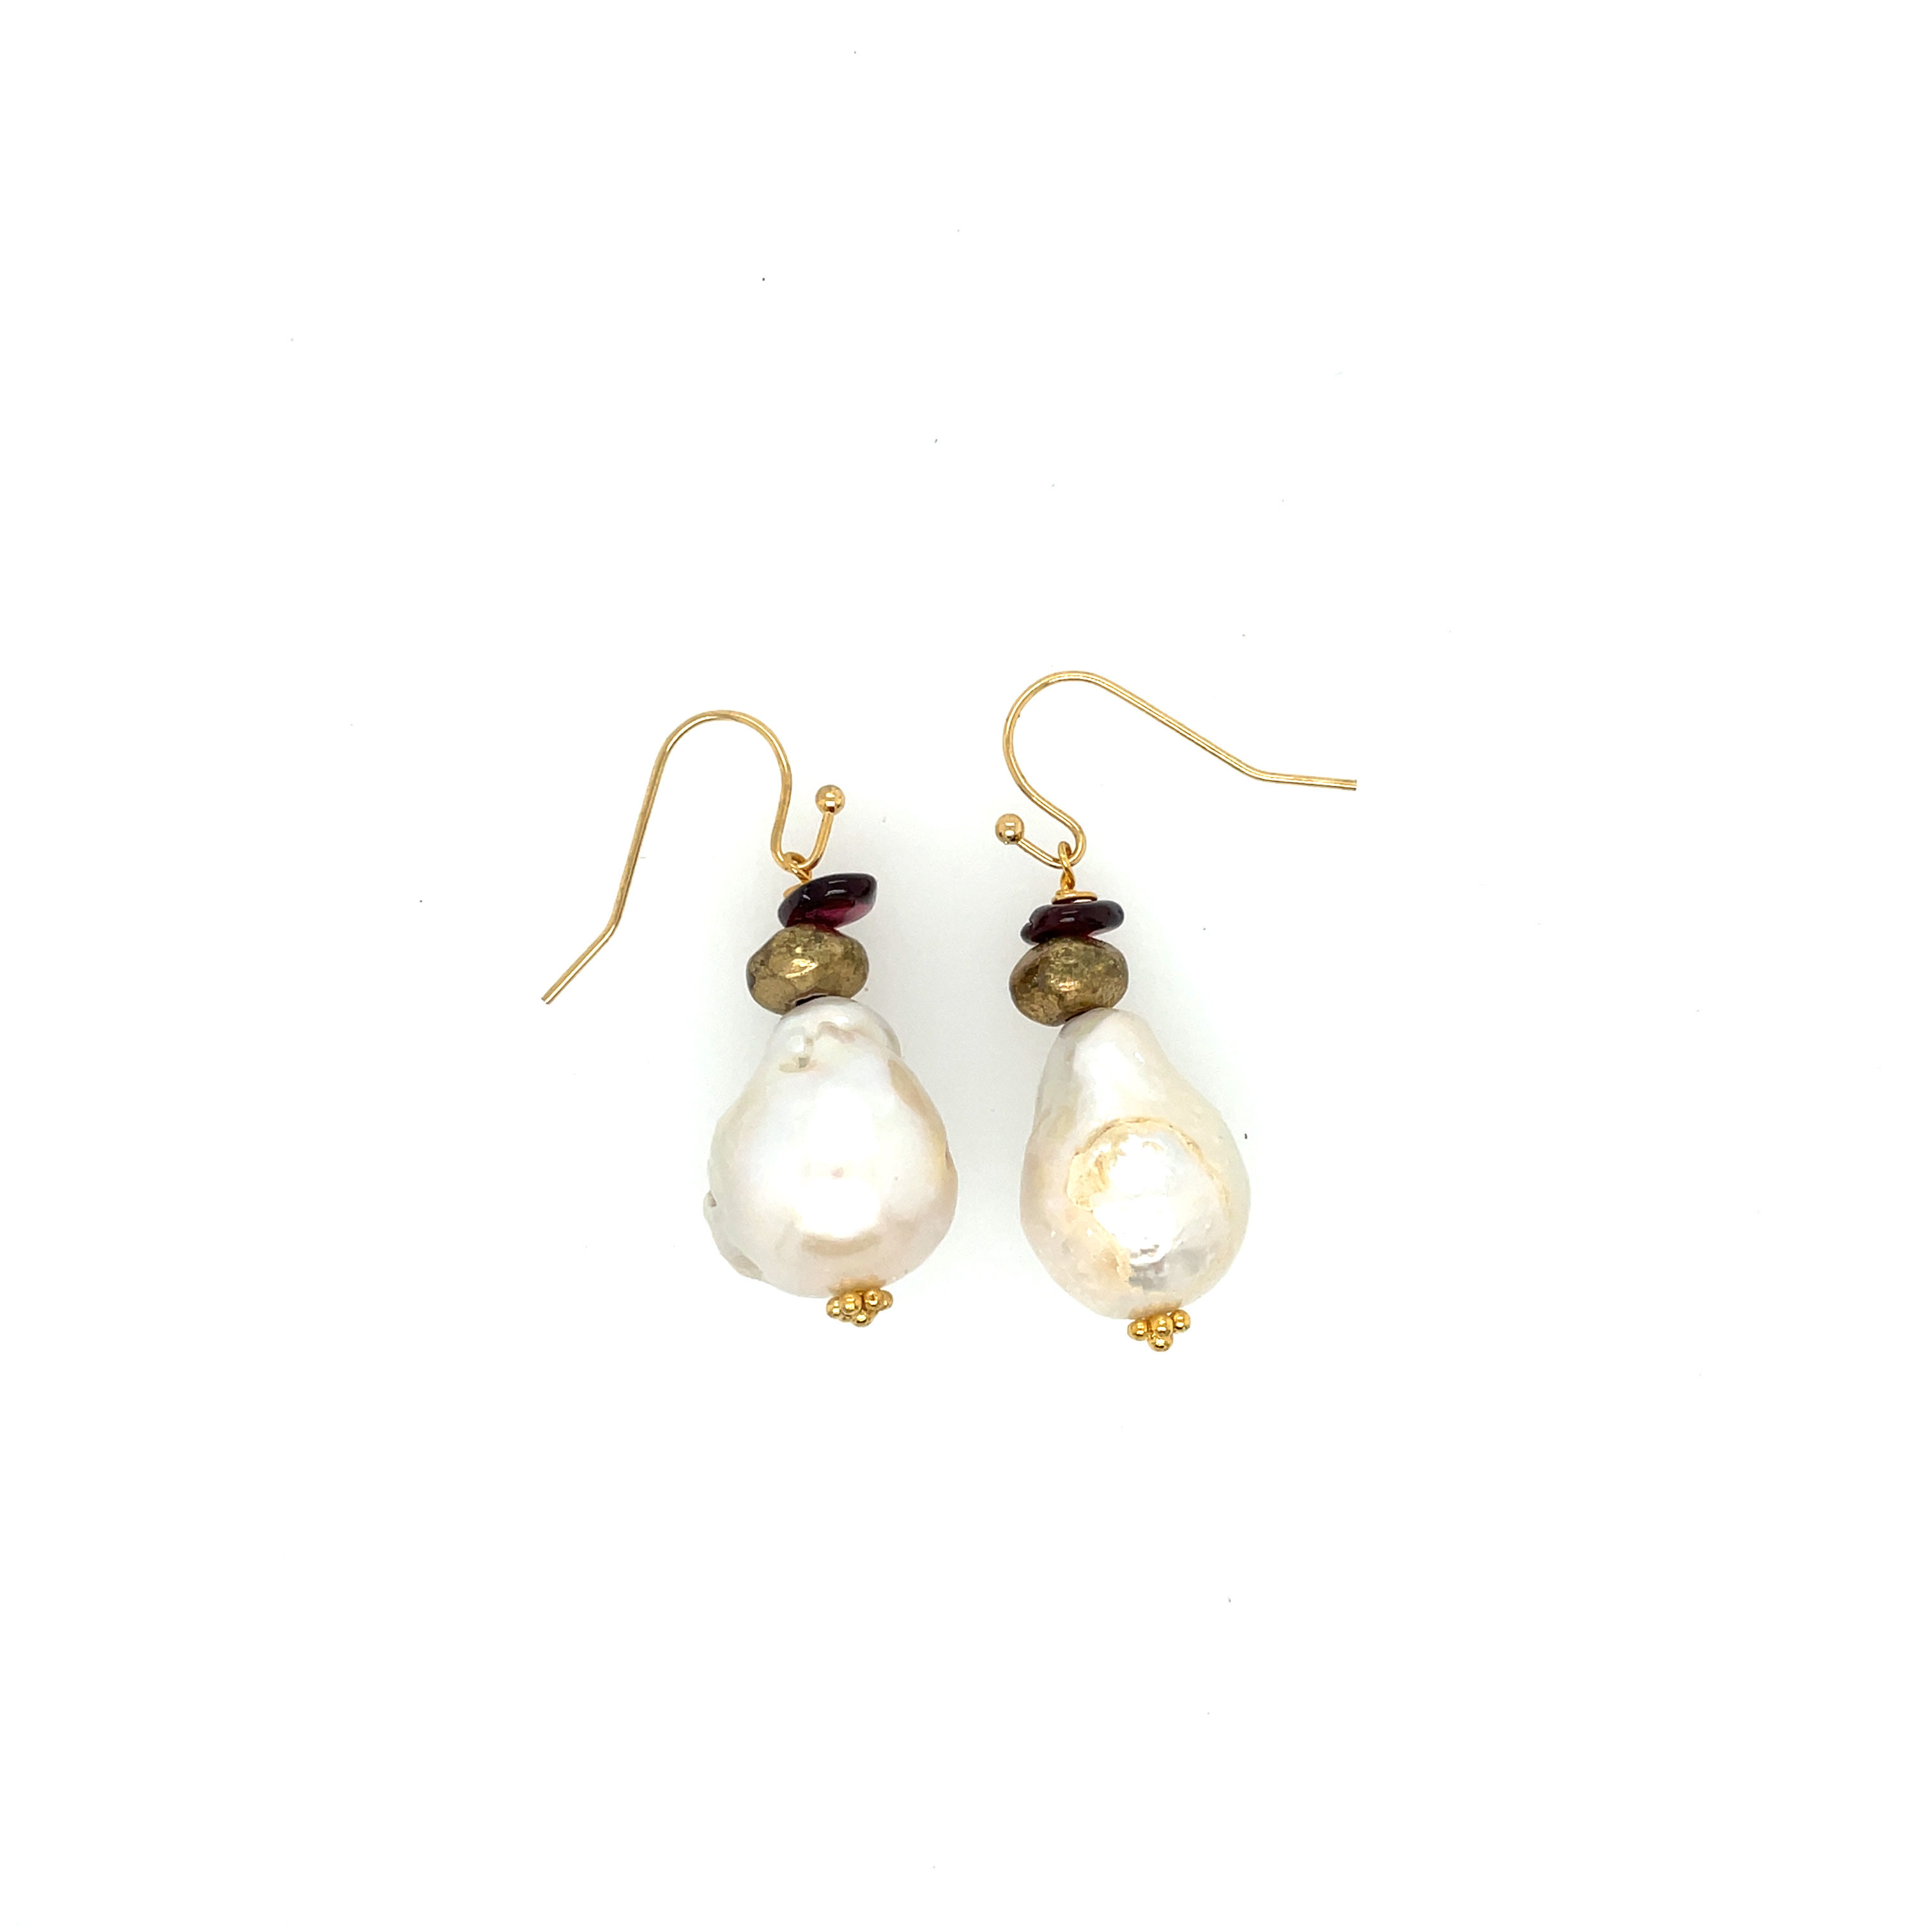 Jumbo baroque freshwater high-quality pearls, uncle Bill dangles